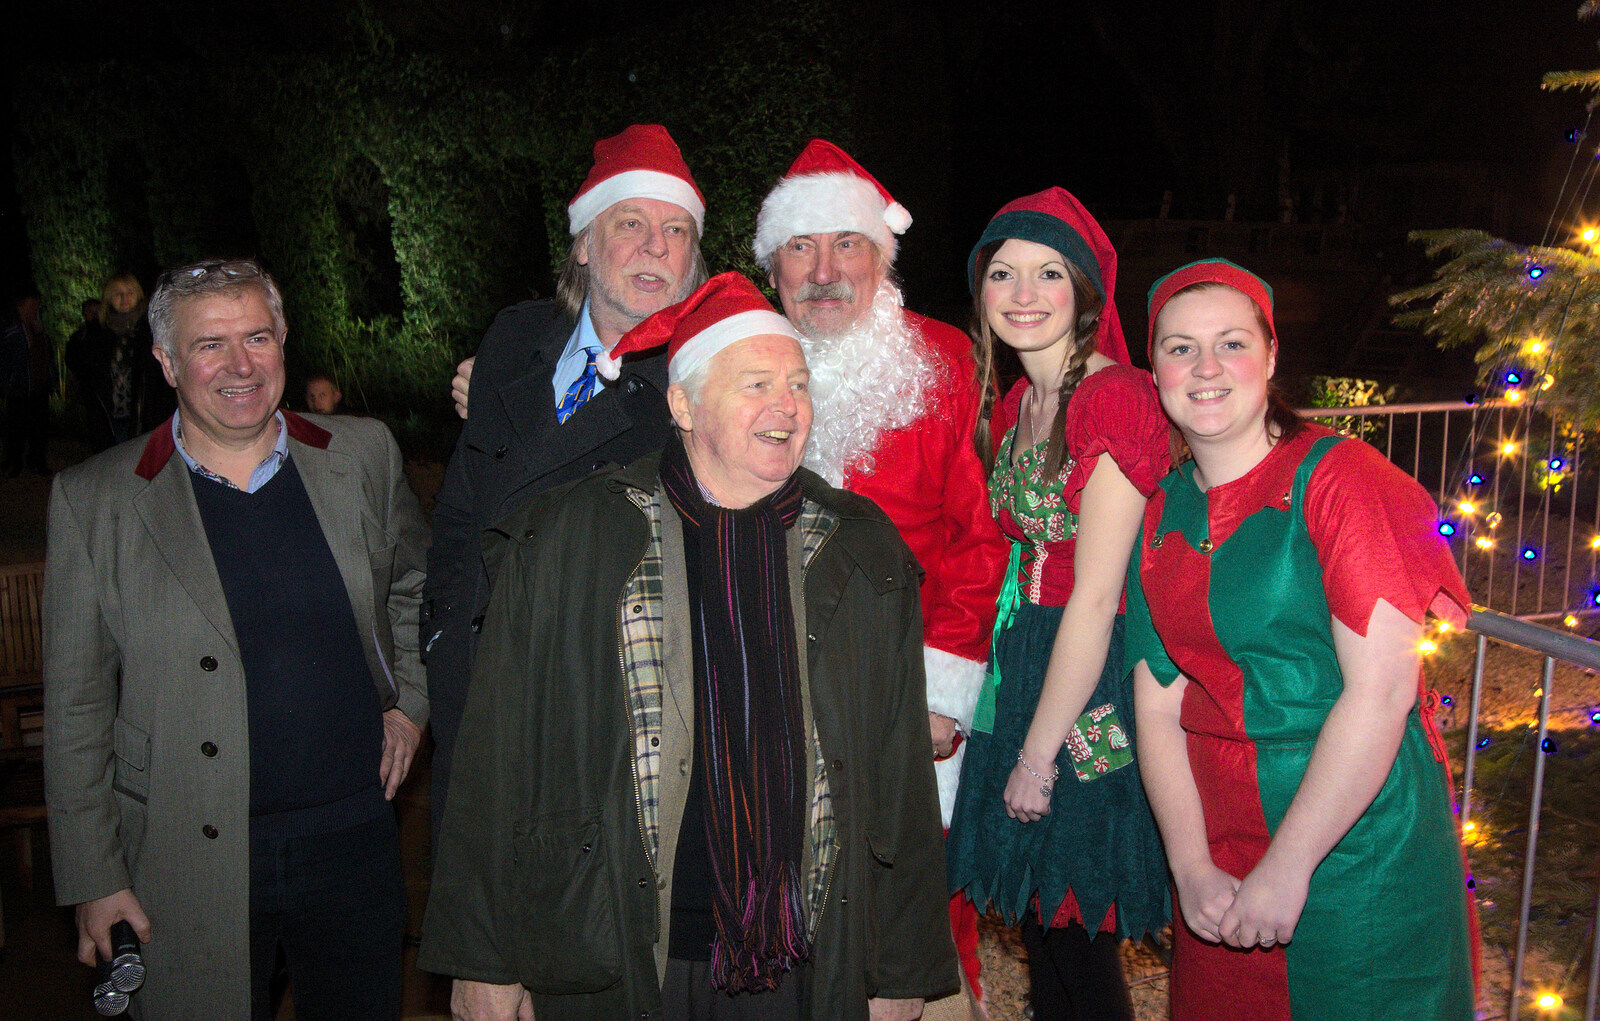 Fraser, Ian Lavender and the staff from Rick Wakeman, Ian Lavender and the Christmas lights, The Oaksmere, Suffolk - 4th December 2014